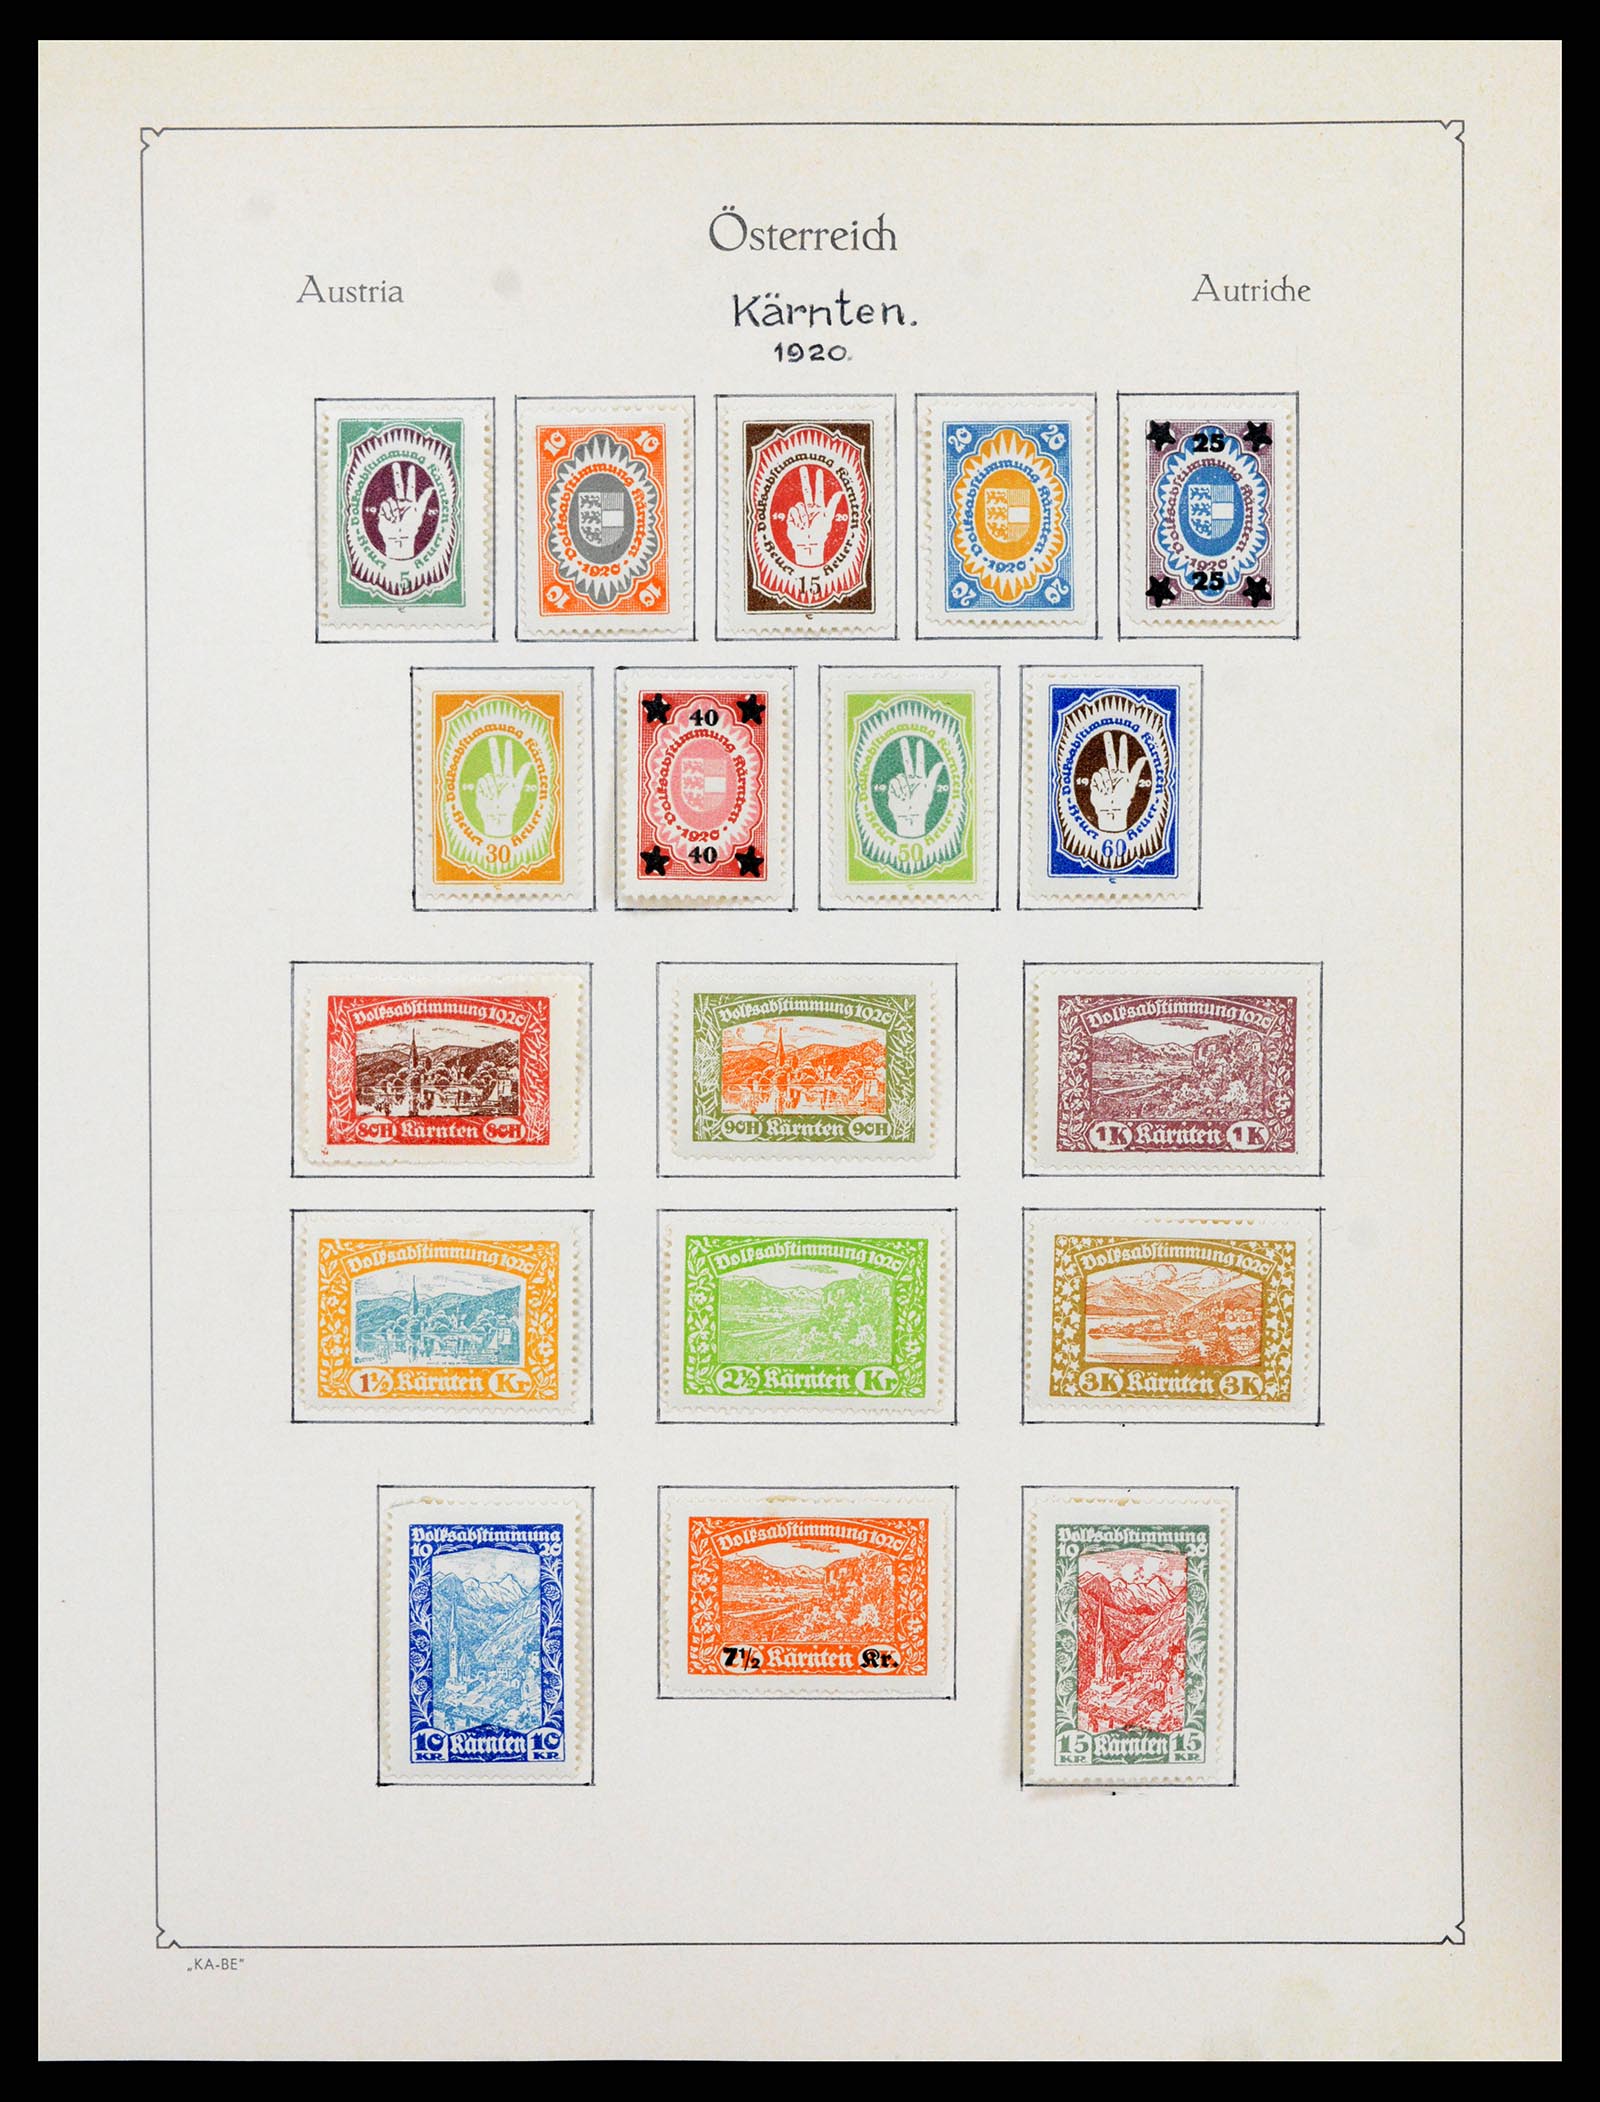 37960 095 - Stamp collection 37960 Austria and territories 1850-1984.